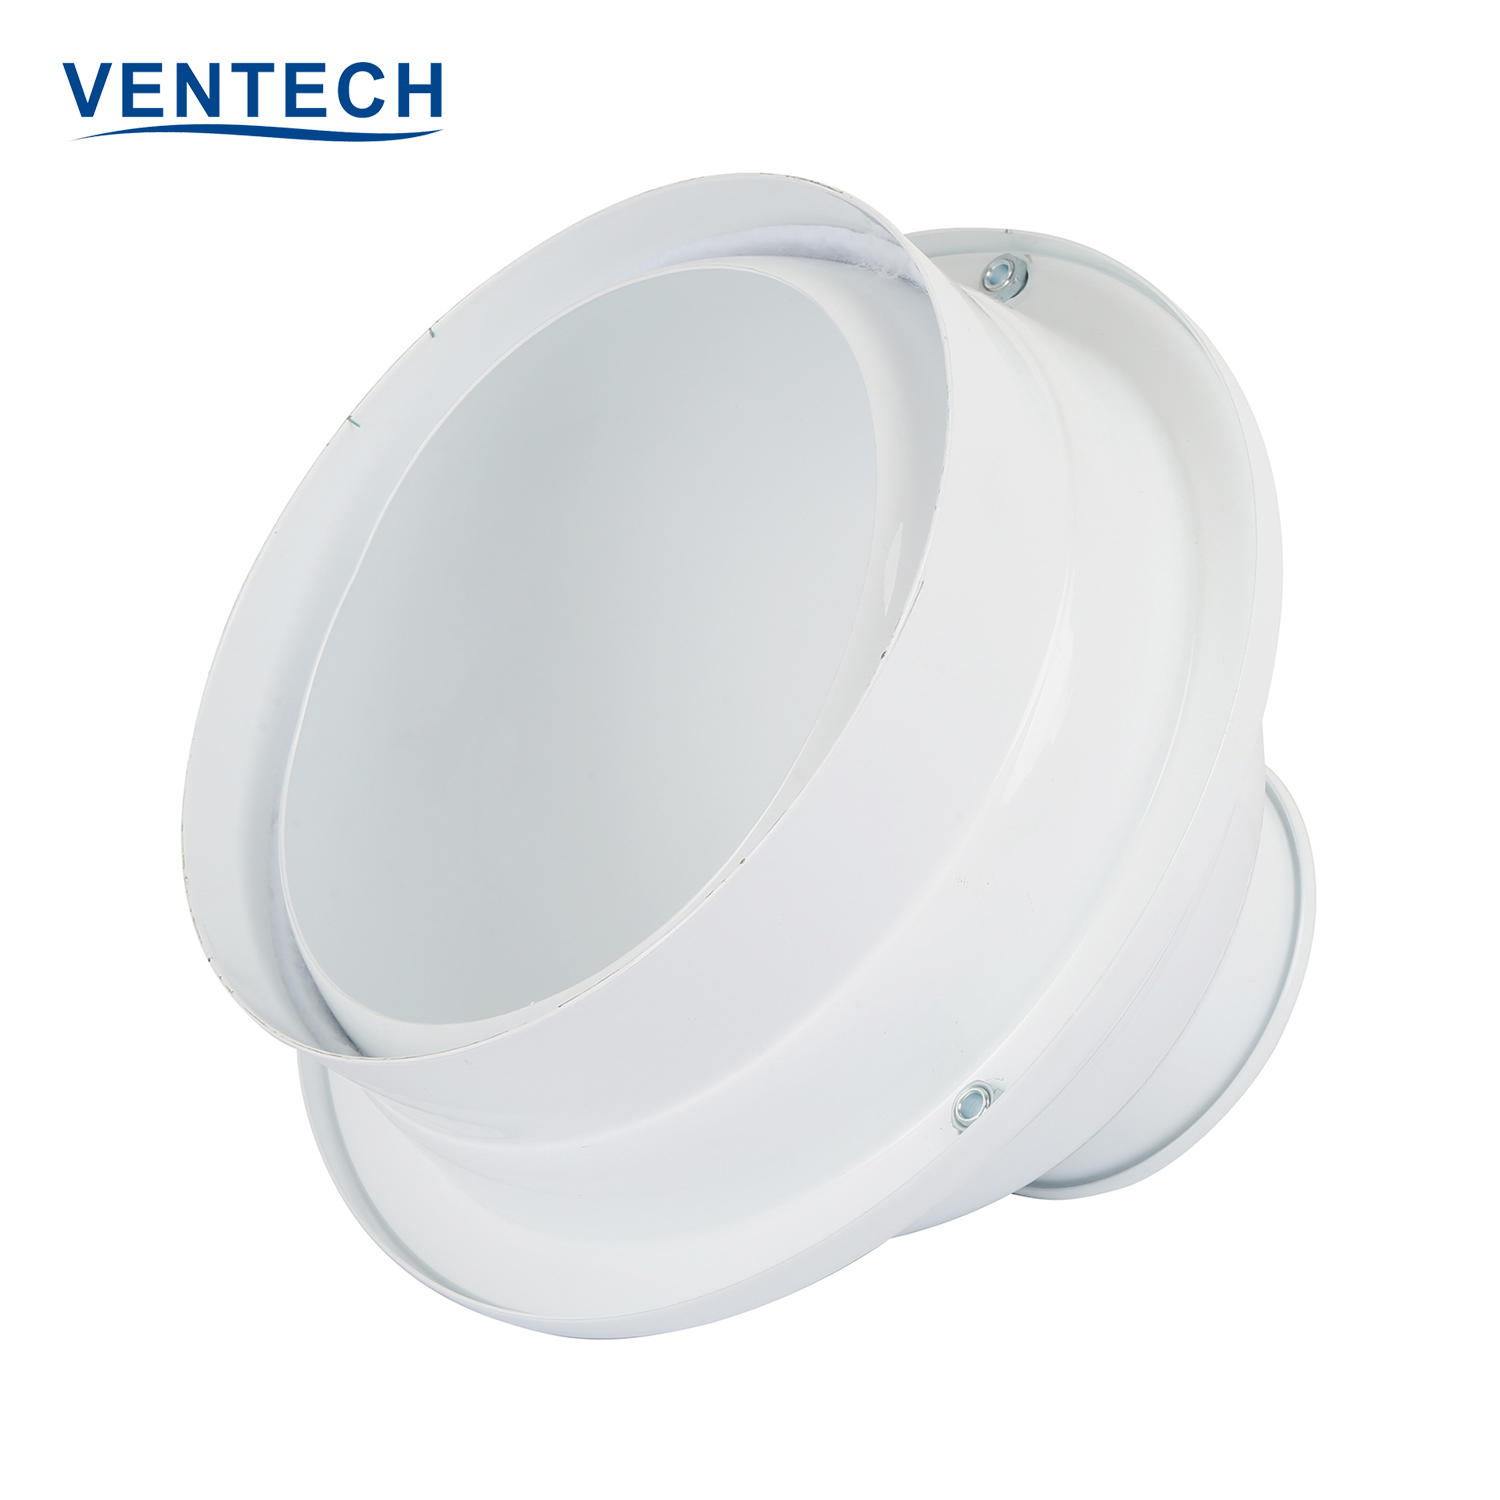 Hvac Ventilation Spherical Ceiling Diffusers Supply Air Adjustable Jet Nozzle Air Conditioning Round Ball Spout Diffusers